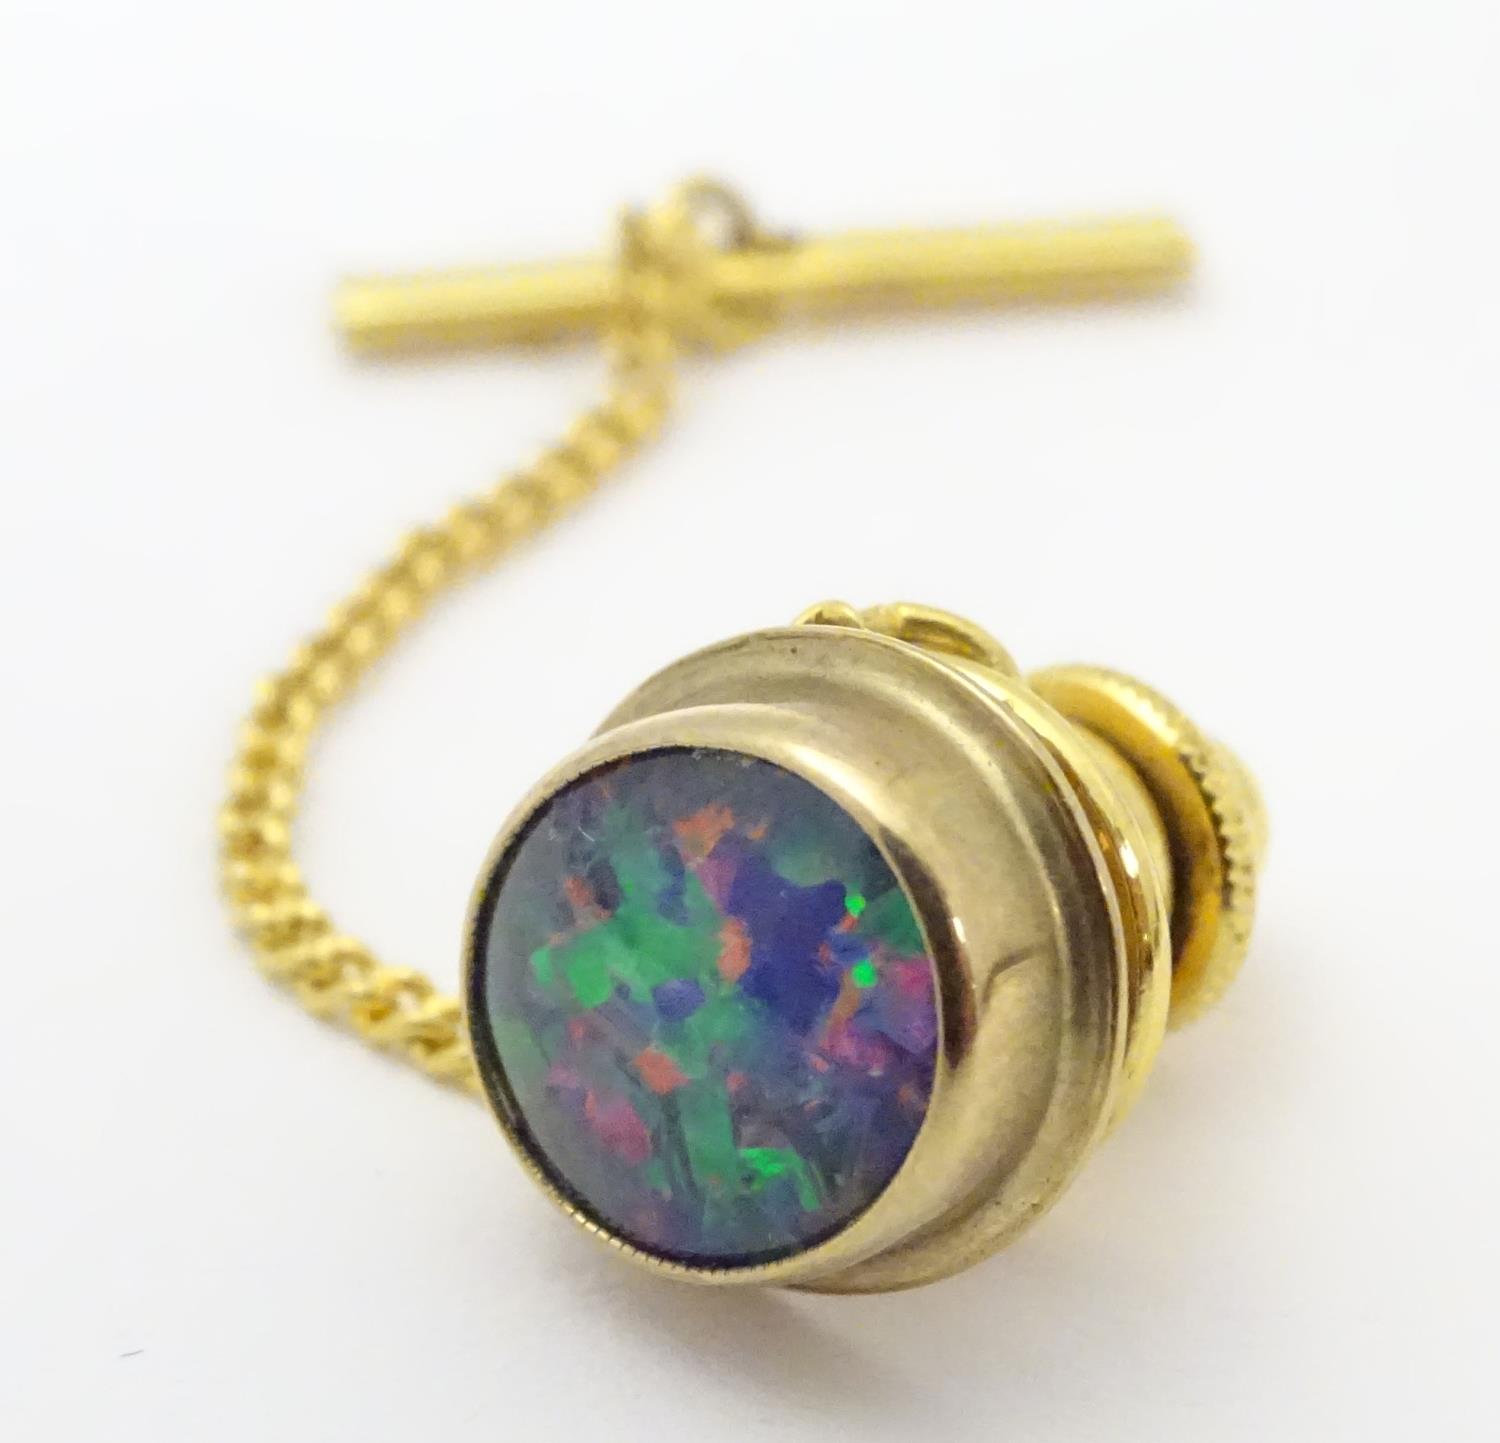 A 9 ct gold tie pin with central opalesque stone and yellow metal securer. Please Note - we do not